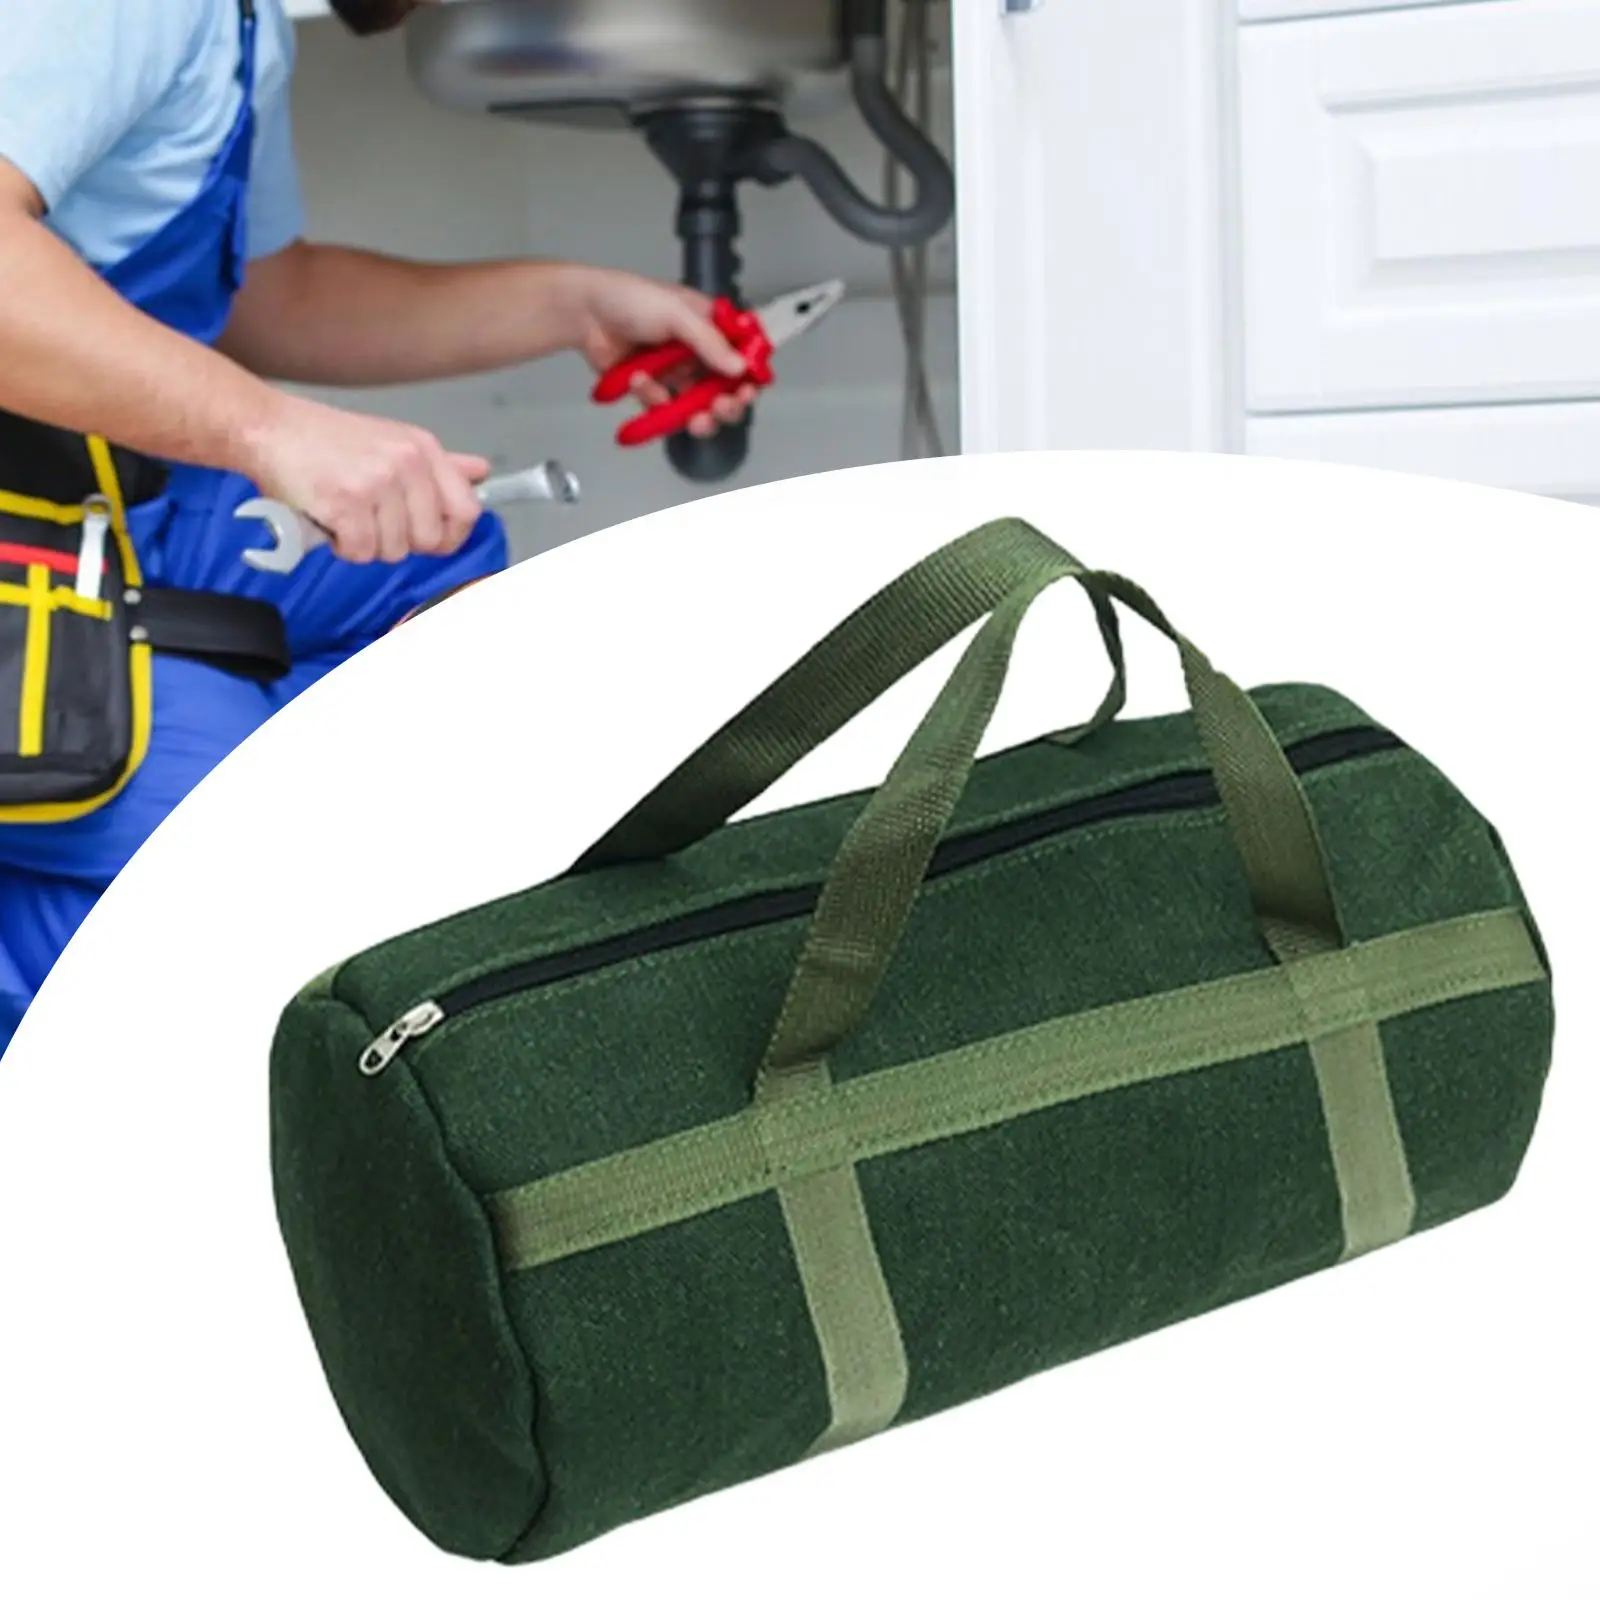 Heavy Duty Tools Case Multipurpose Wide Mouth Zippered Tool Organizer Bag for Plumber Carpenter Worker Electrician Woodworker